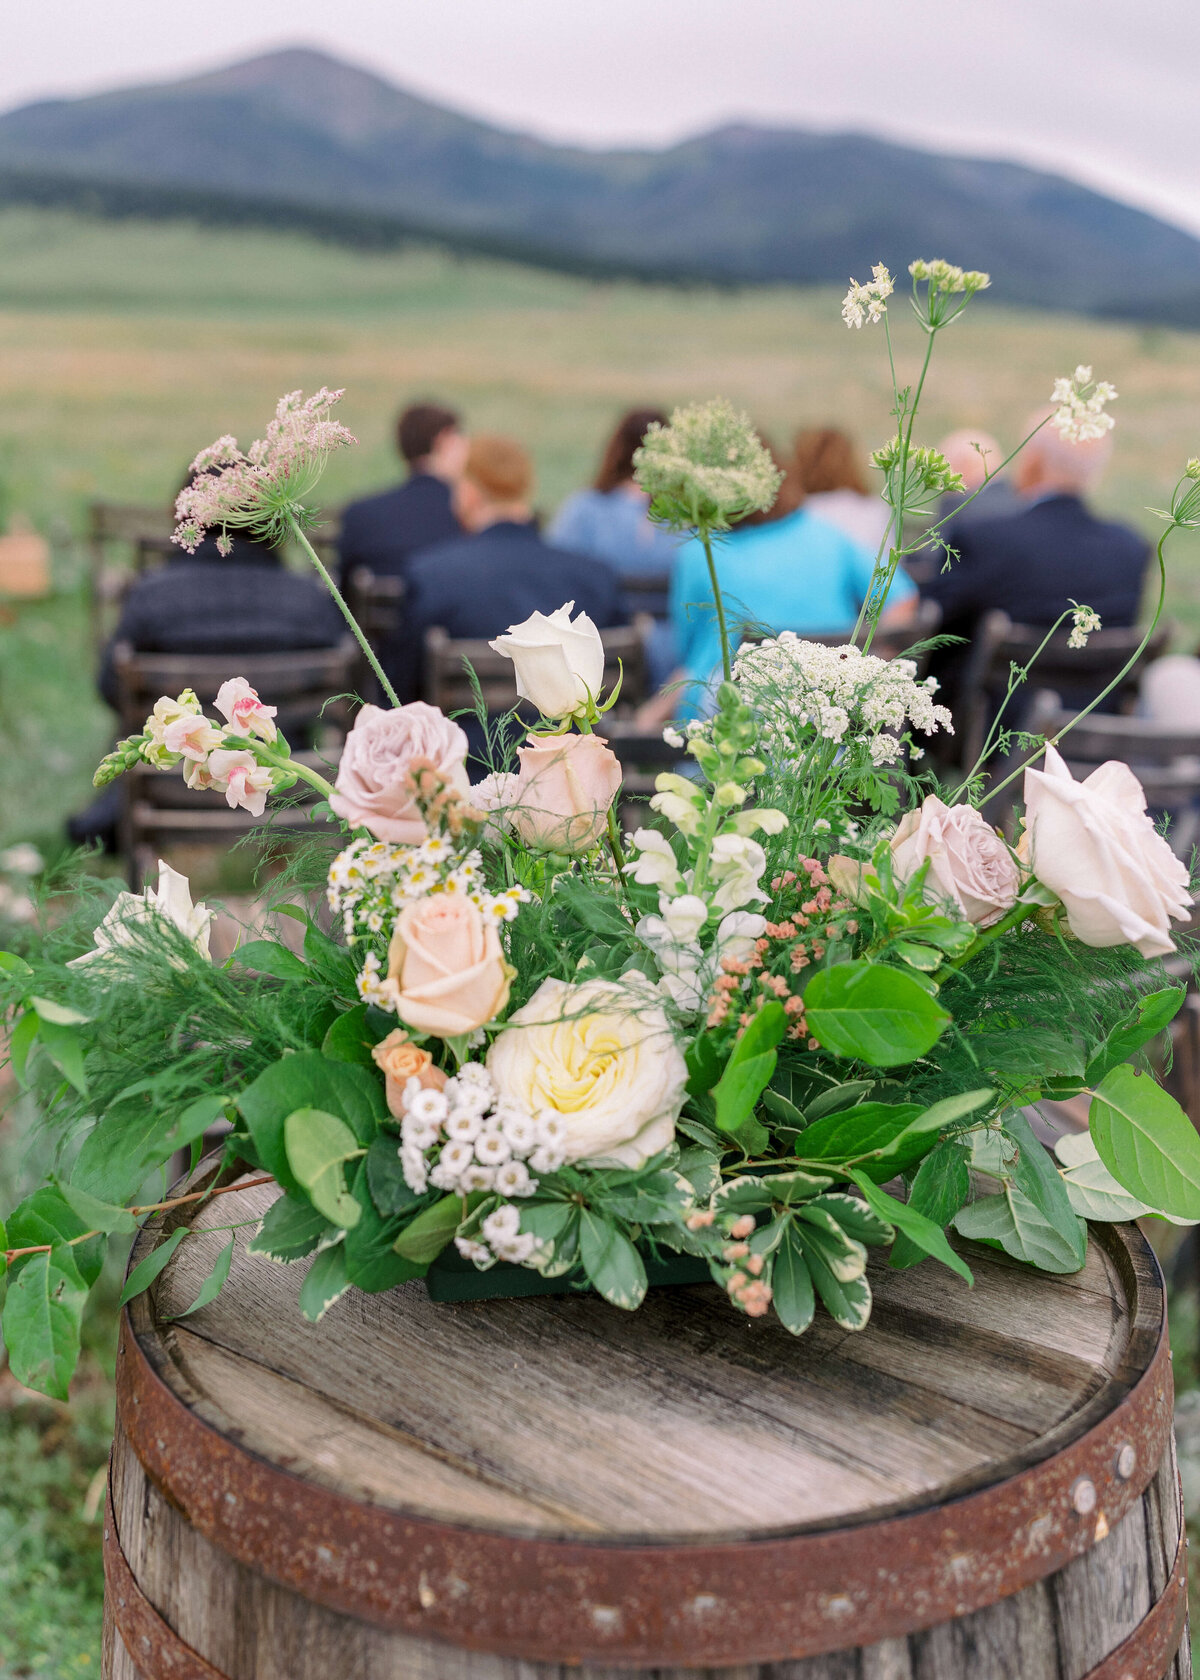 Beautiful pastel florals welcomed guests to the ceremony space of an outdoor wedding